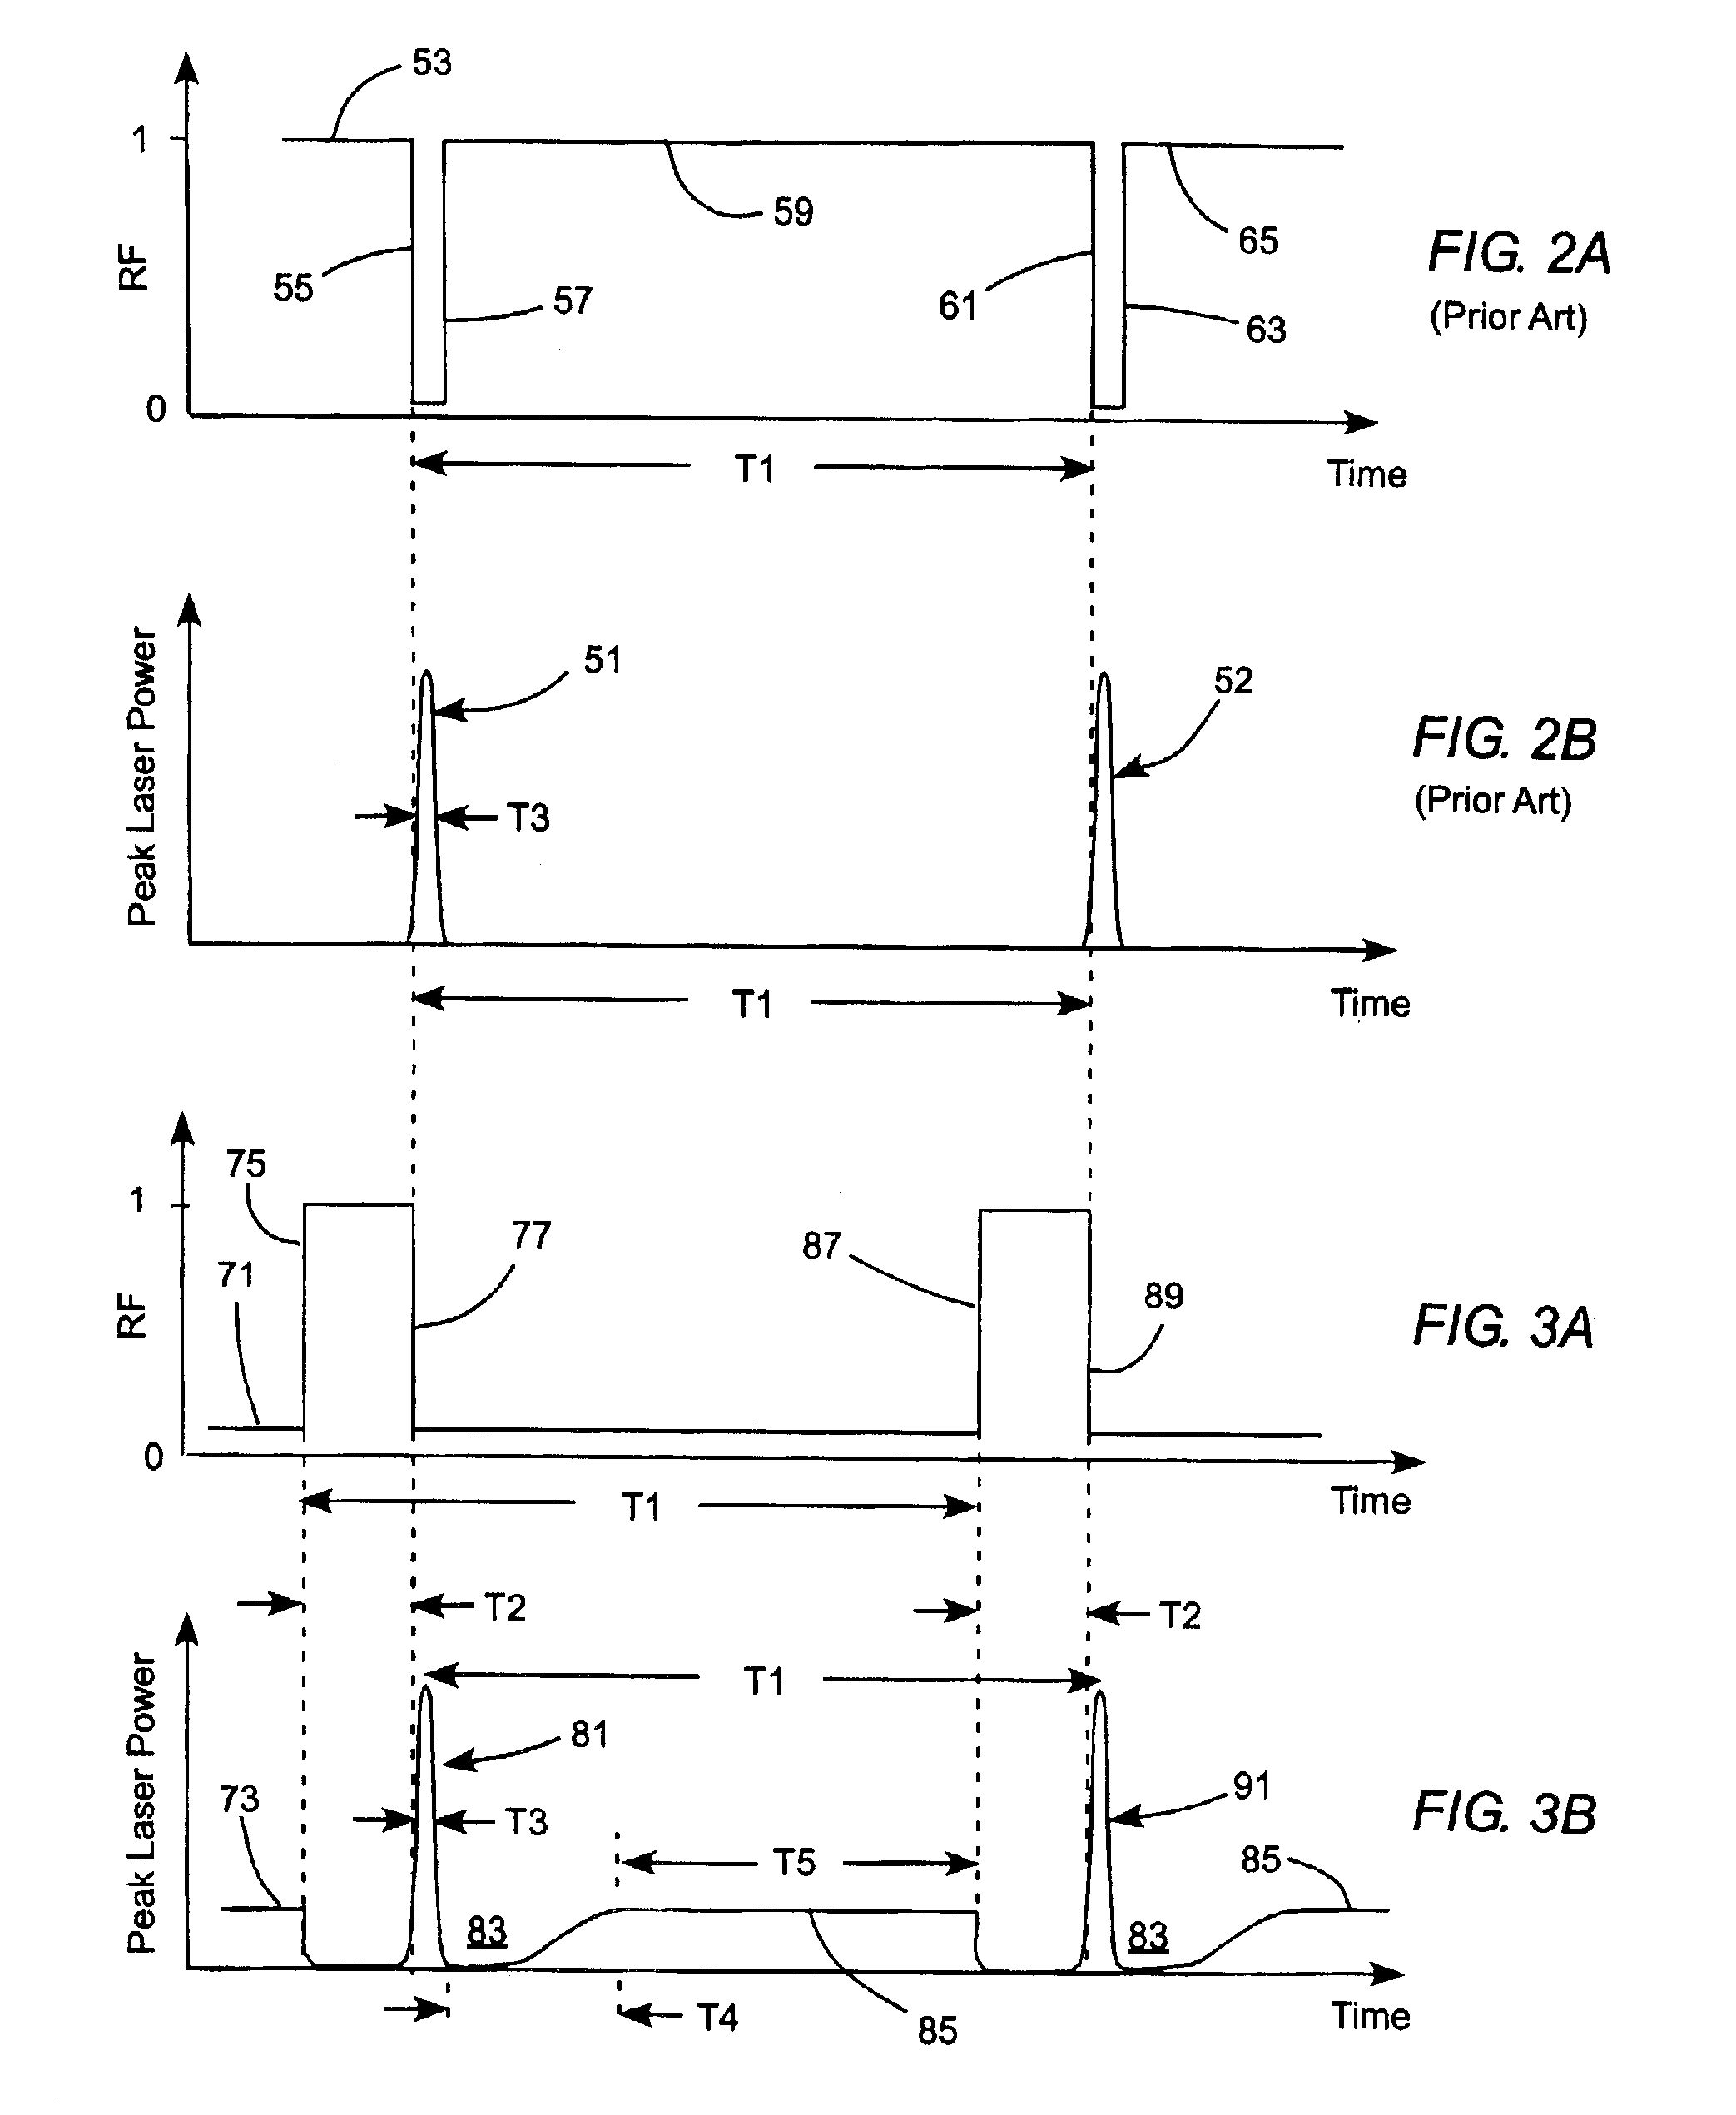 Q-switching method for pulse train generation